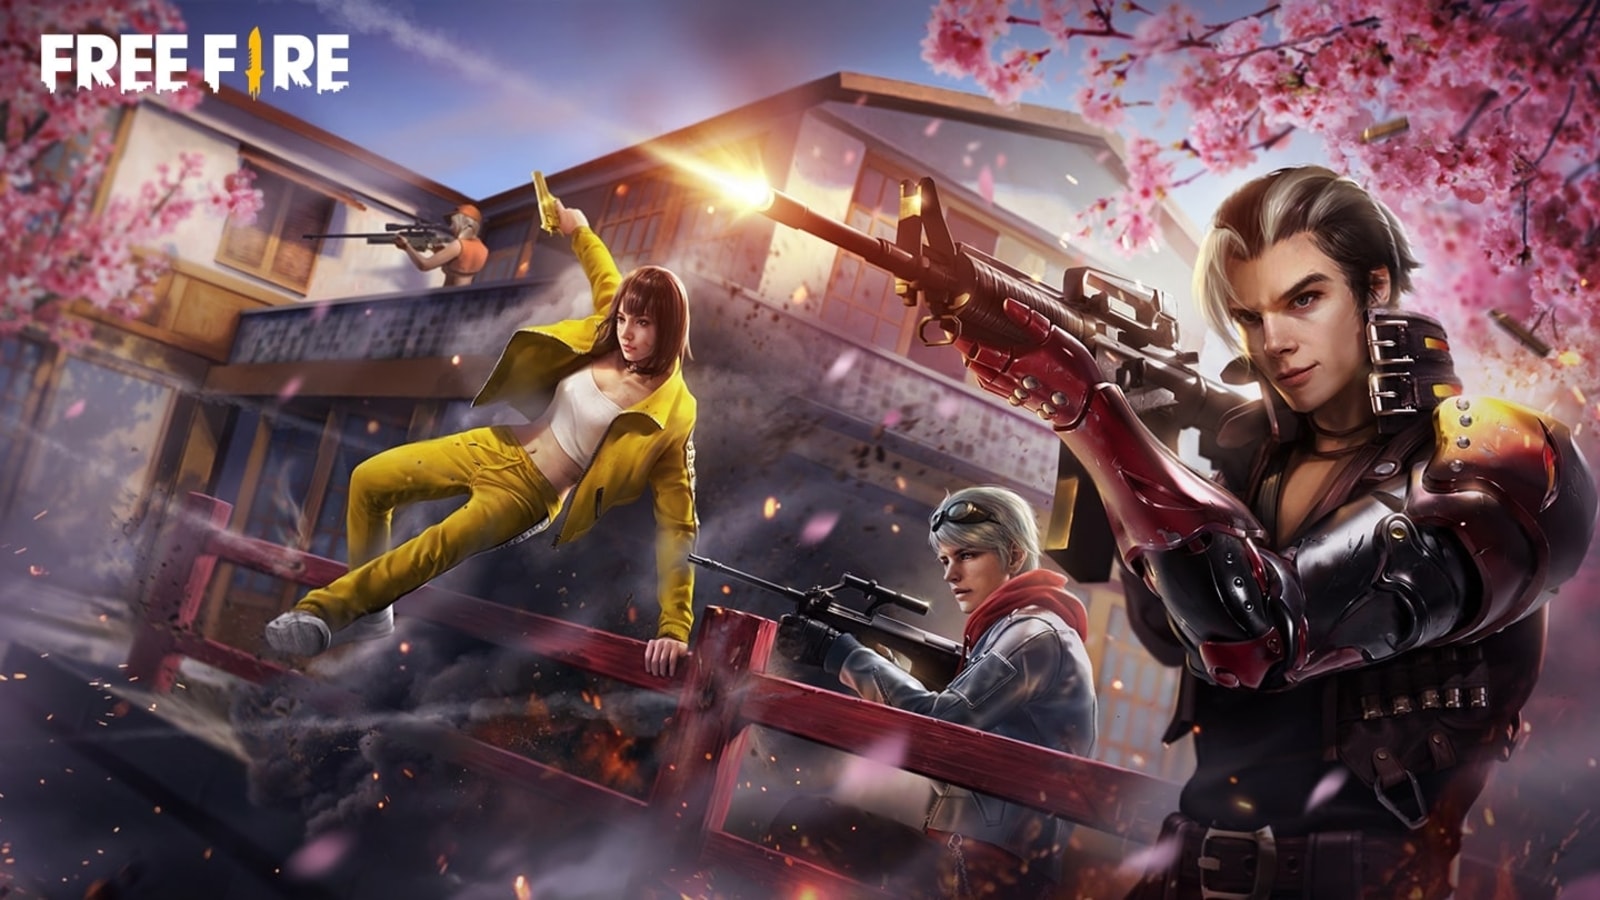 Garena Free Fire India: A Grand Relaunch on September 5th - Free